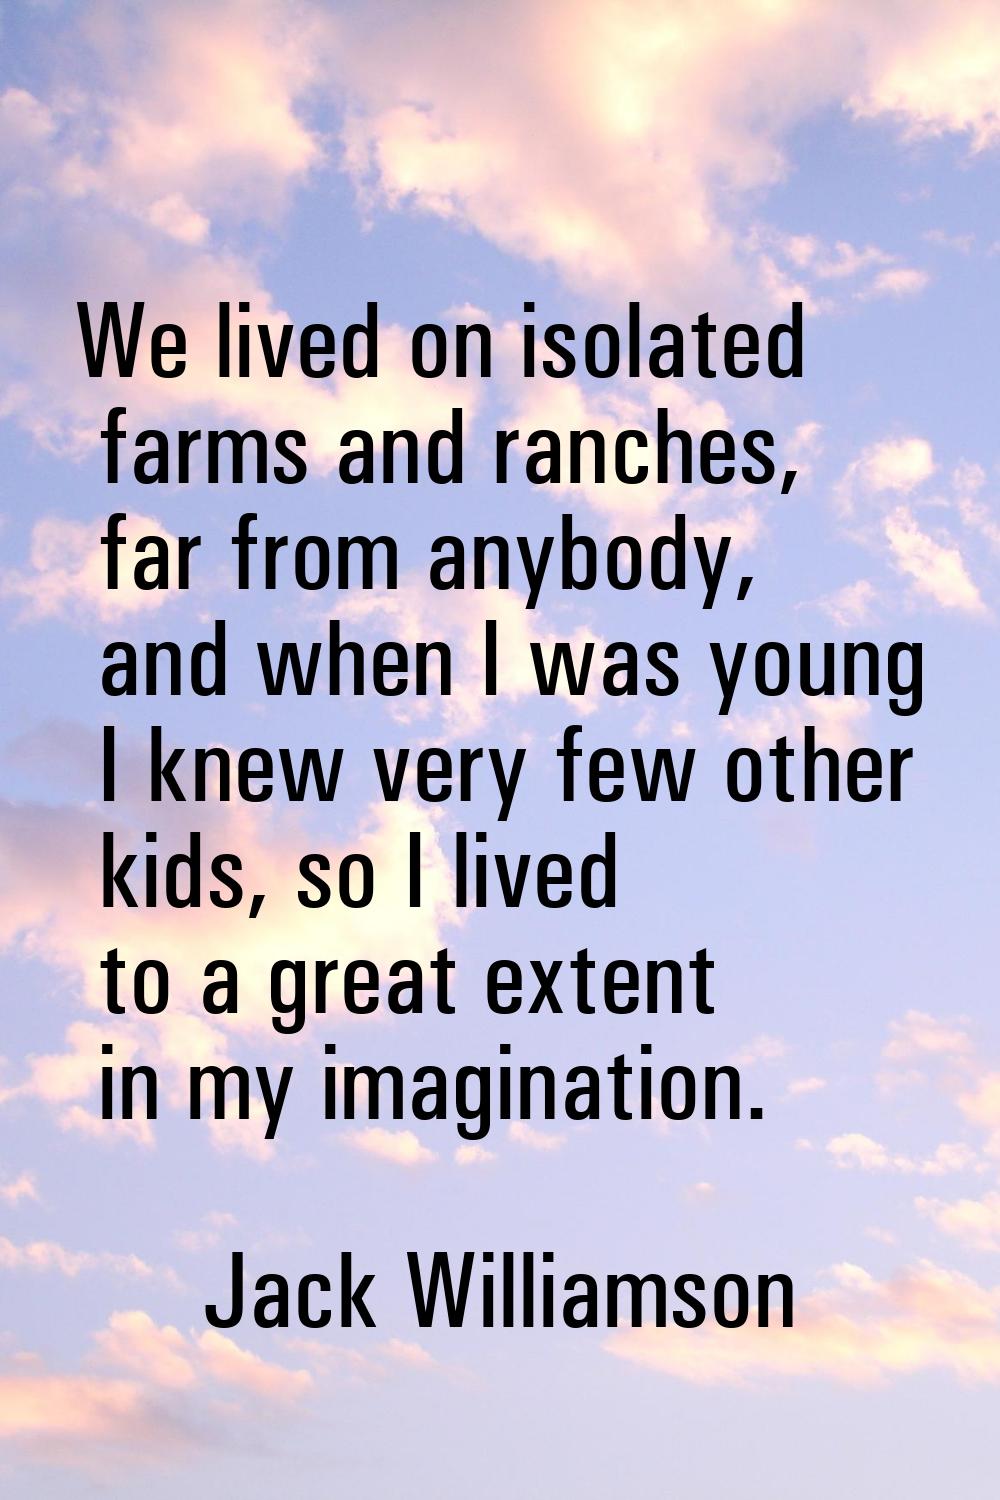 We lived on isolated farms and ranches, far from anybody, and when I was young I knew very few othe